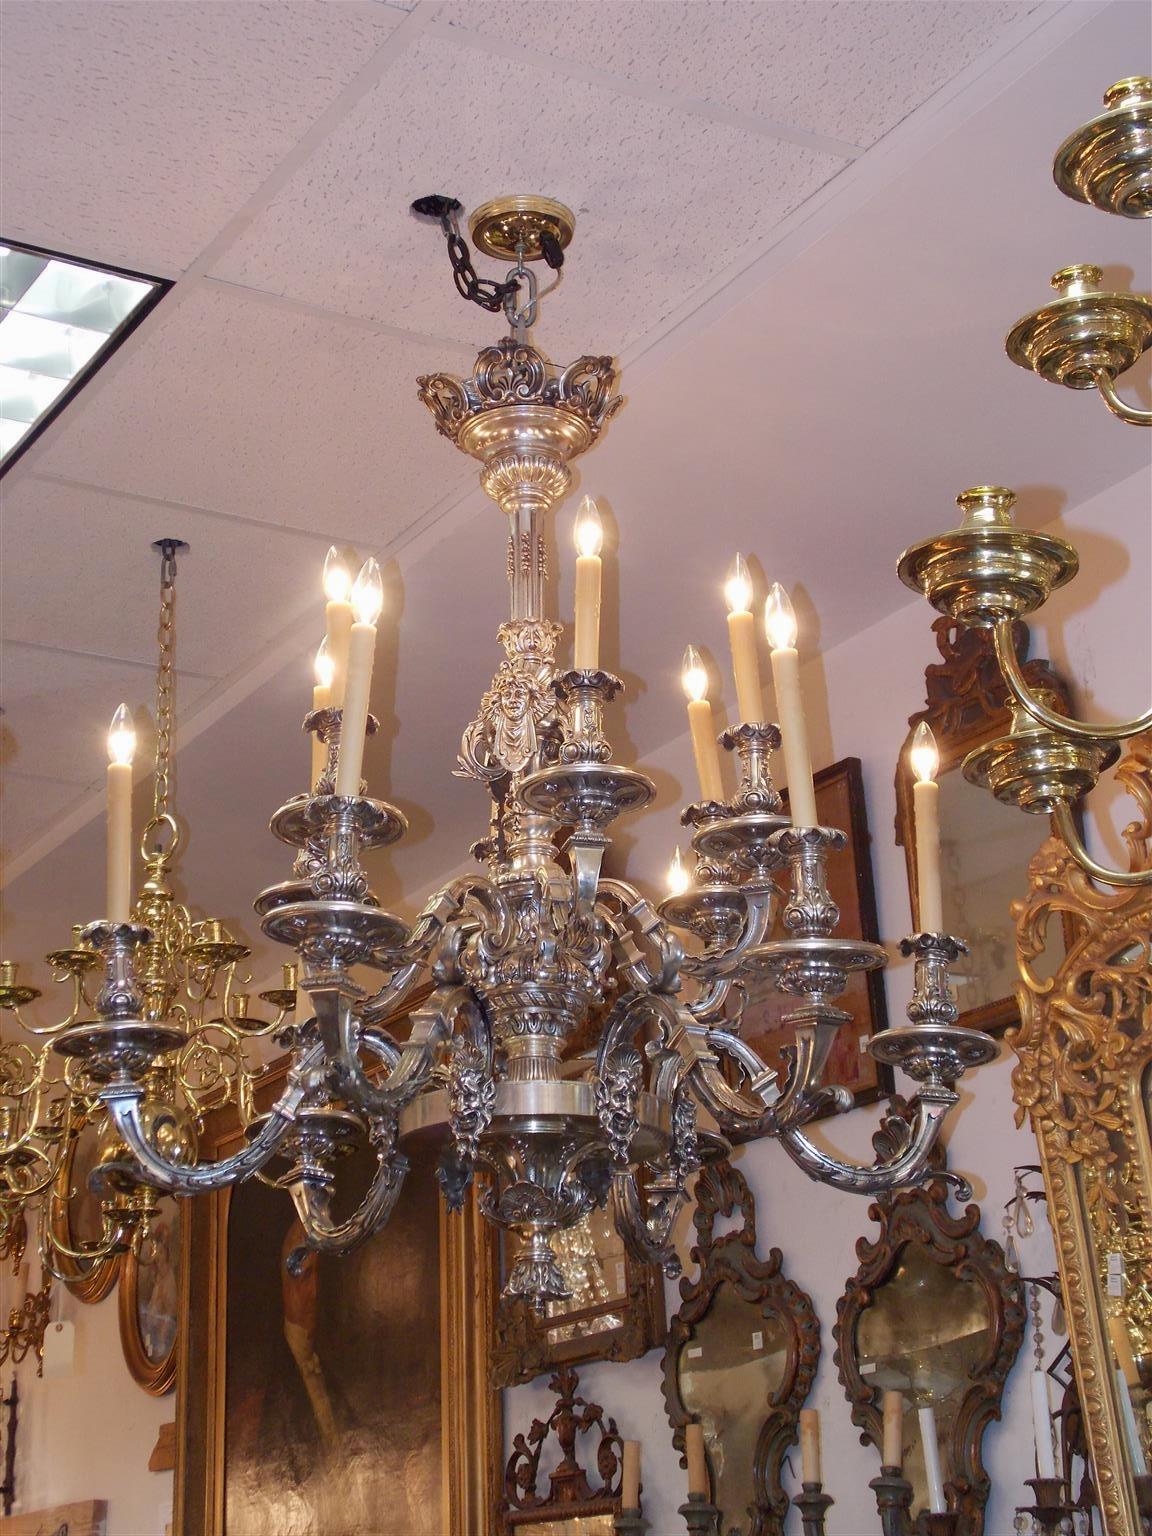 English silver over bronze figural chandelier with decorative floral canopy, centered fluted berry and mask column, twelve fluted scrolled arms with acanthus foliage, and resting on a acanthus shell circular base with flanking mythological figures.